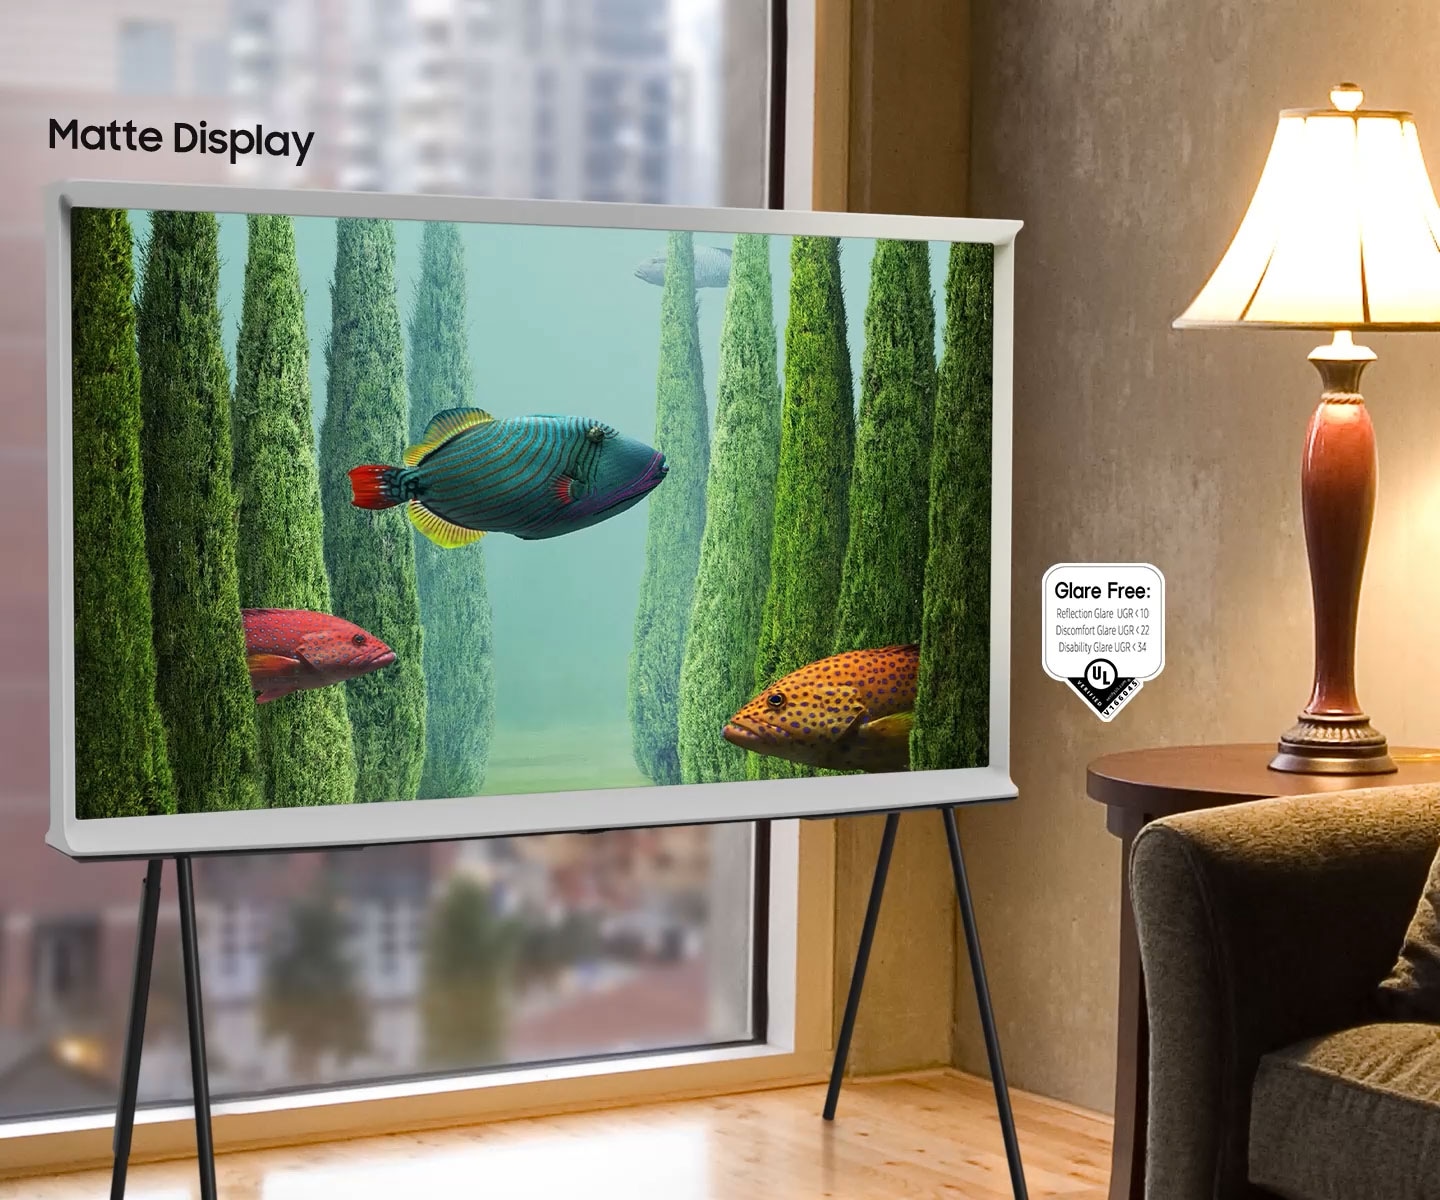 Conventional display has light reflections while Matte Display does not. Glare Free logo with Reflection Glare UGR<10, Discomfort Glare UGR<22, Disability Glare UGR<34 is also on display.